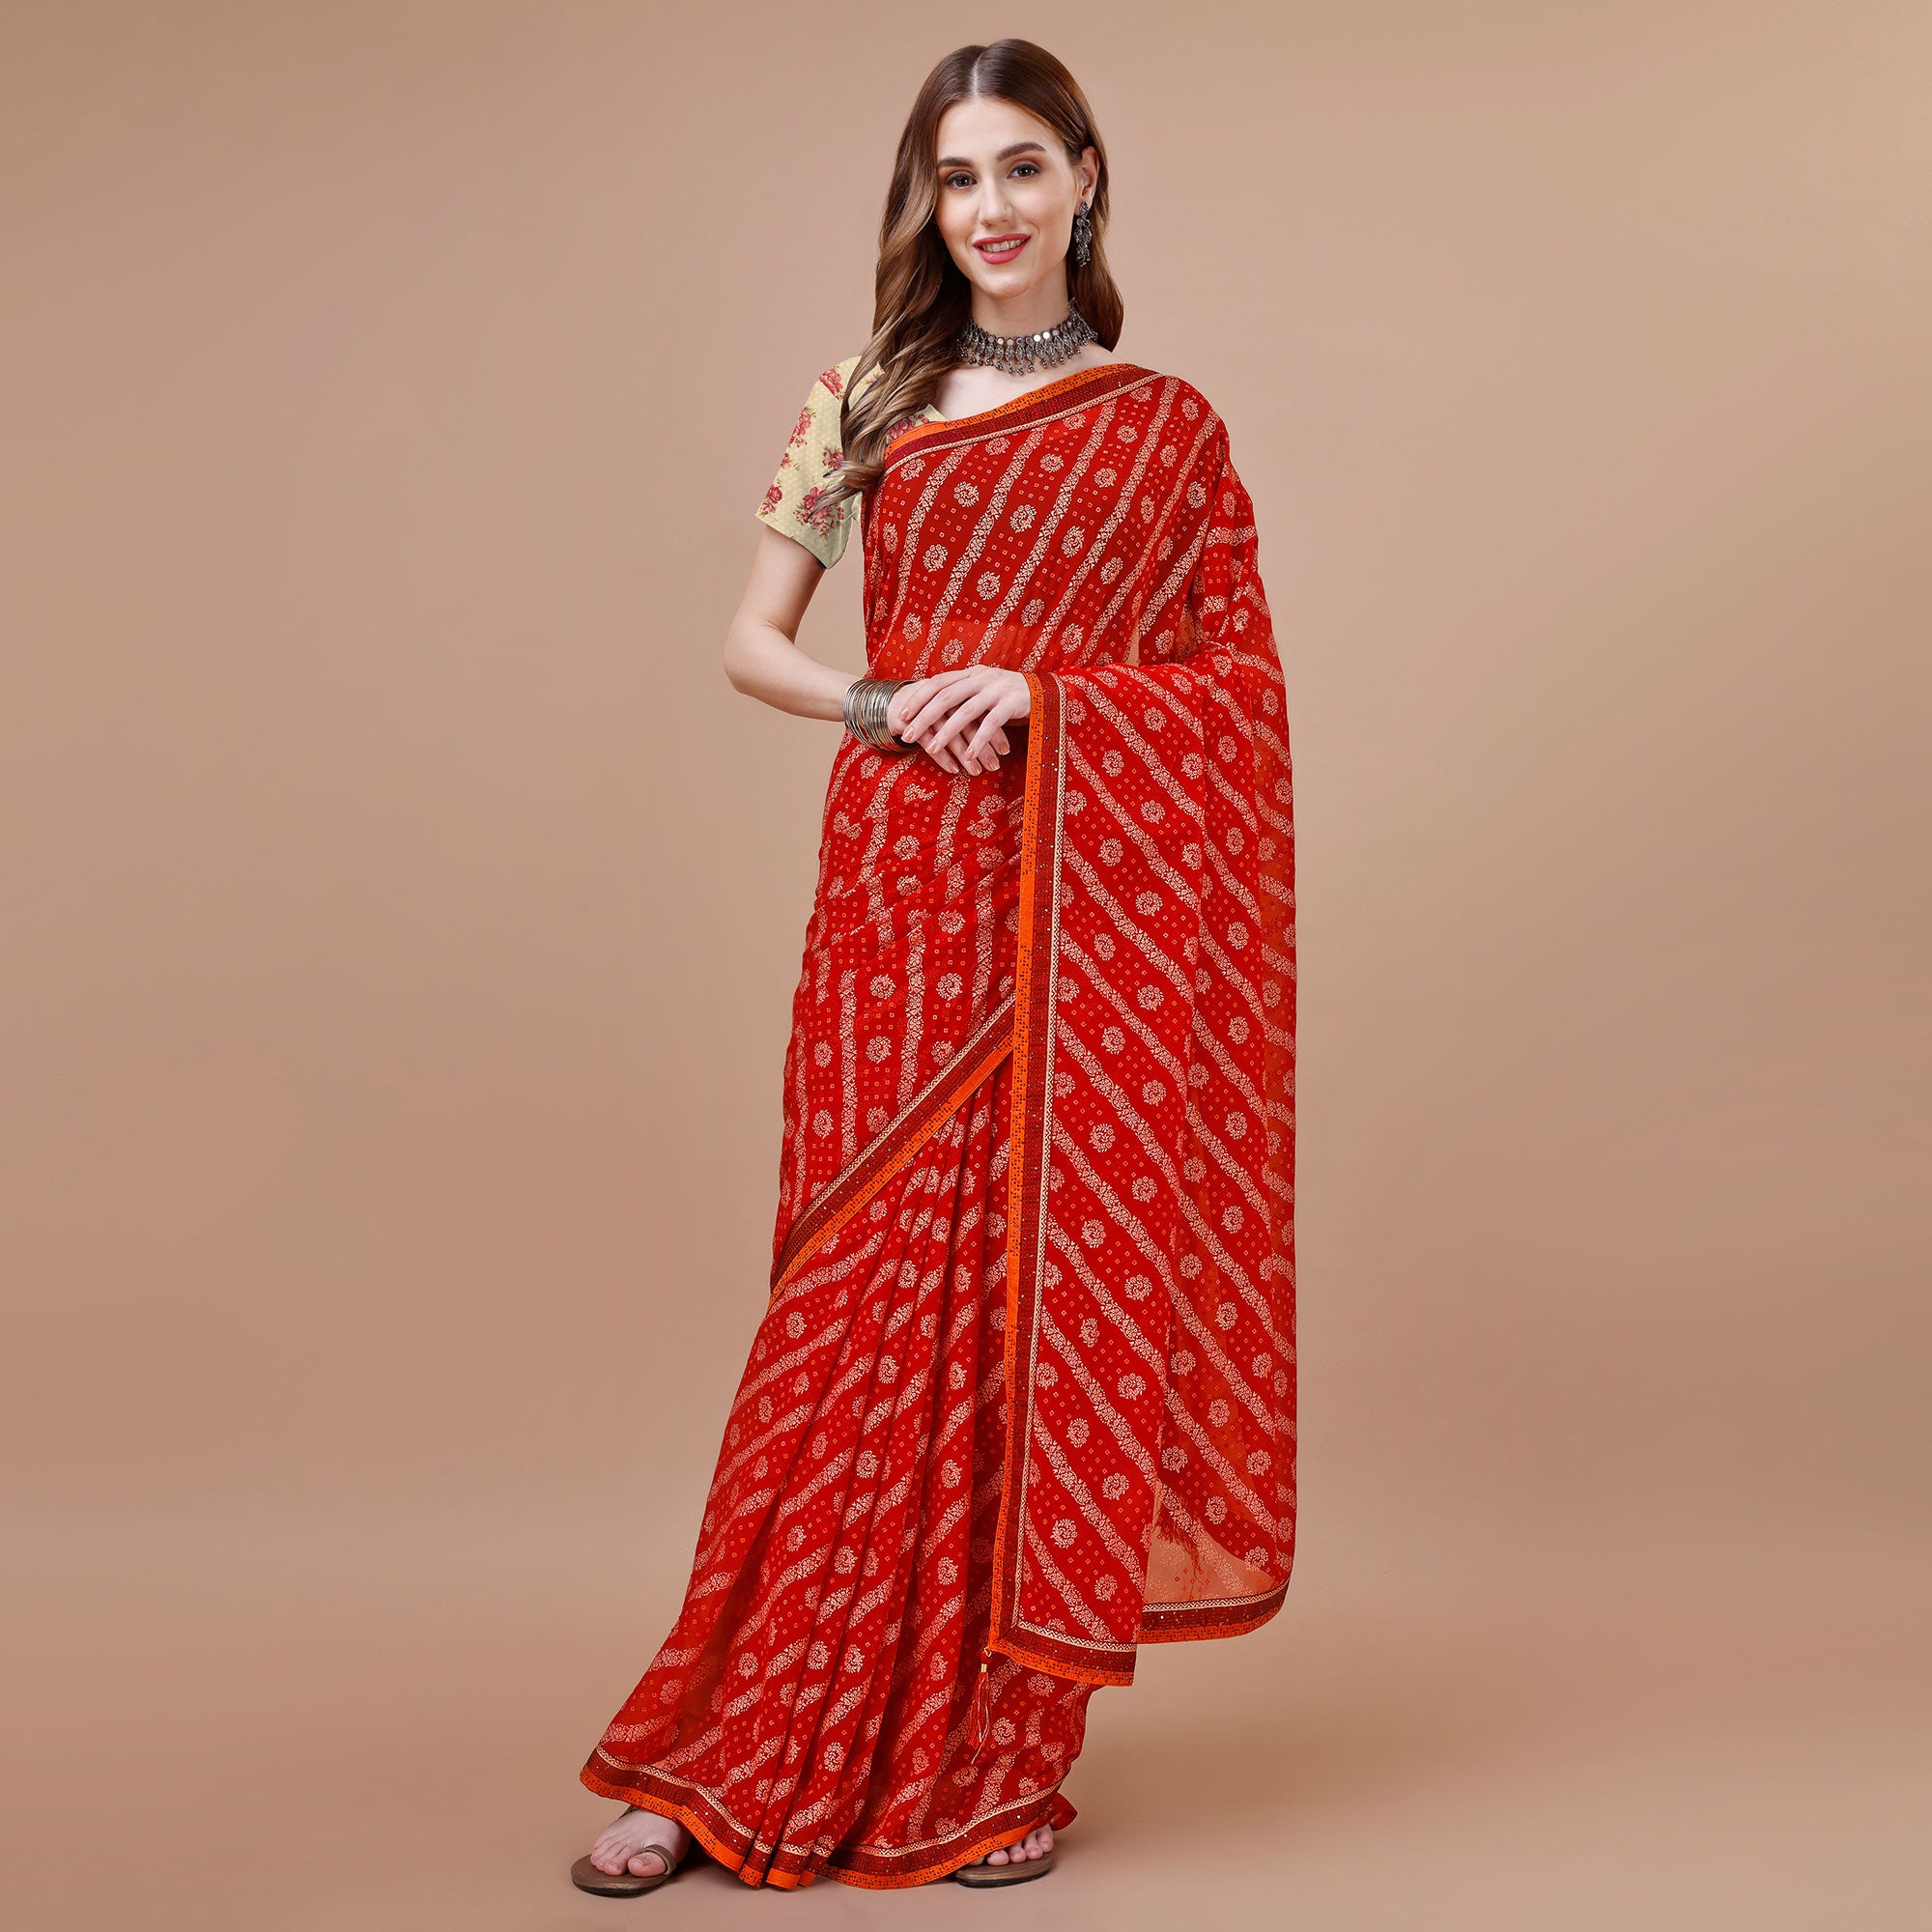 Red Floral Foil Printed Chiffon Saree With Lace Border